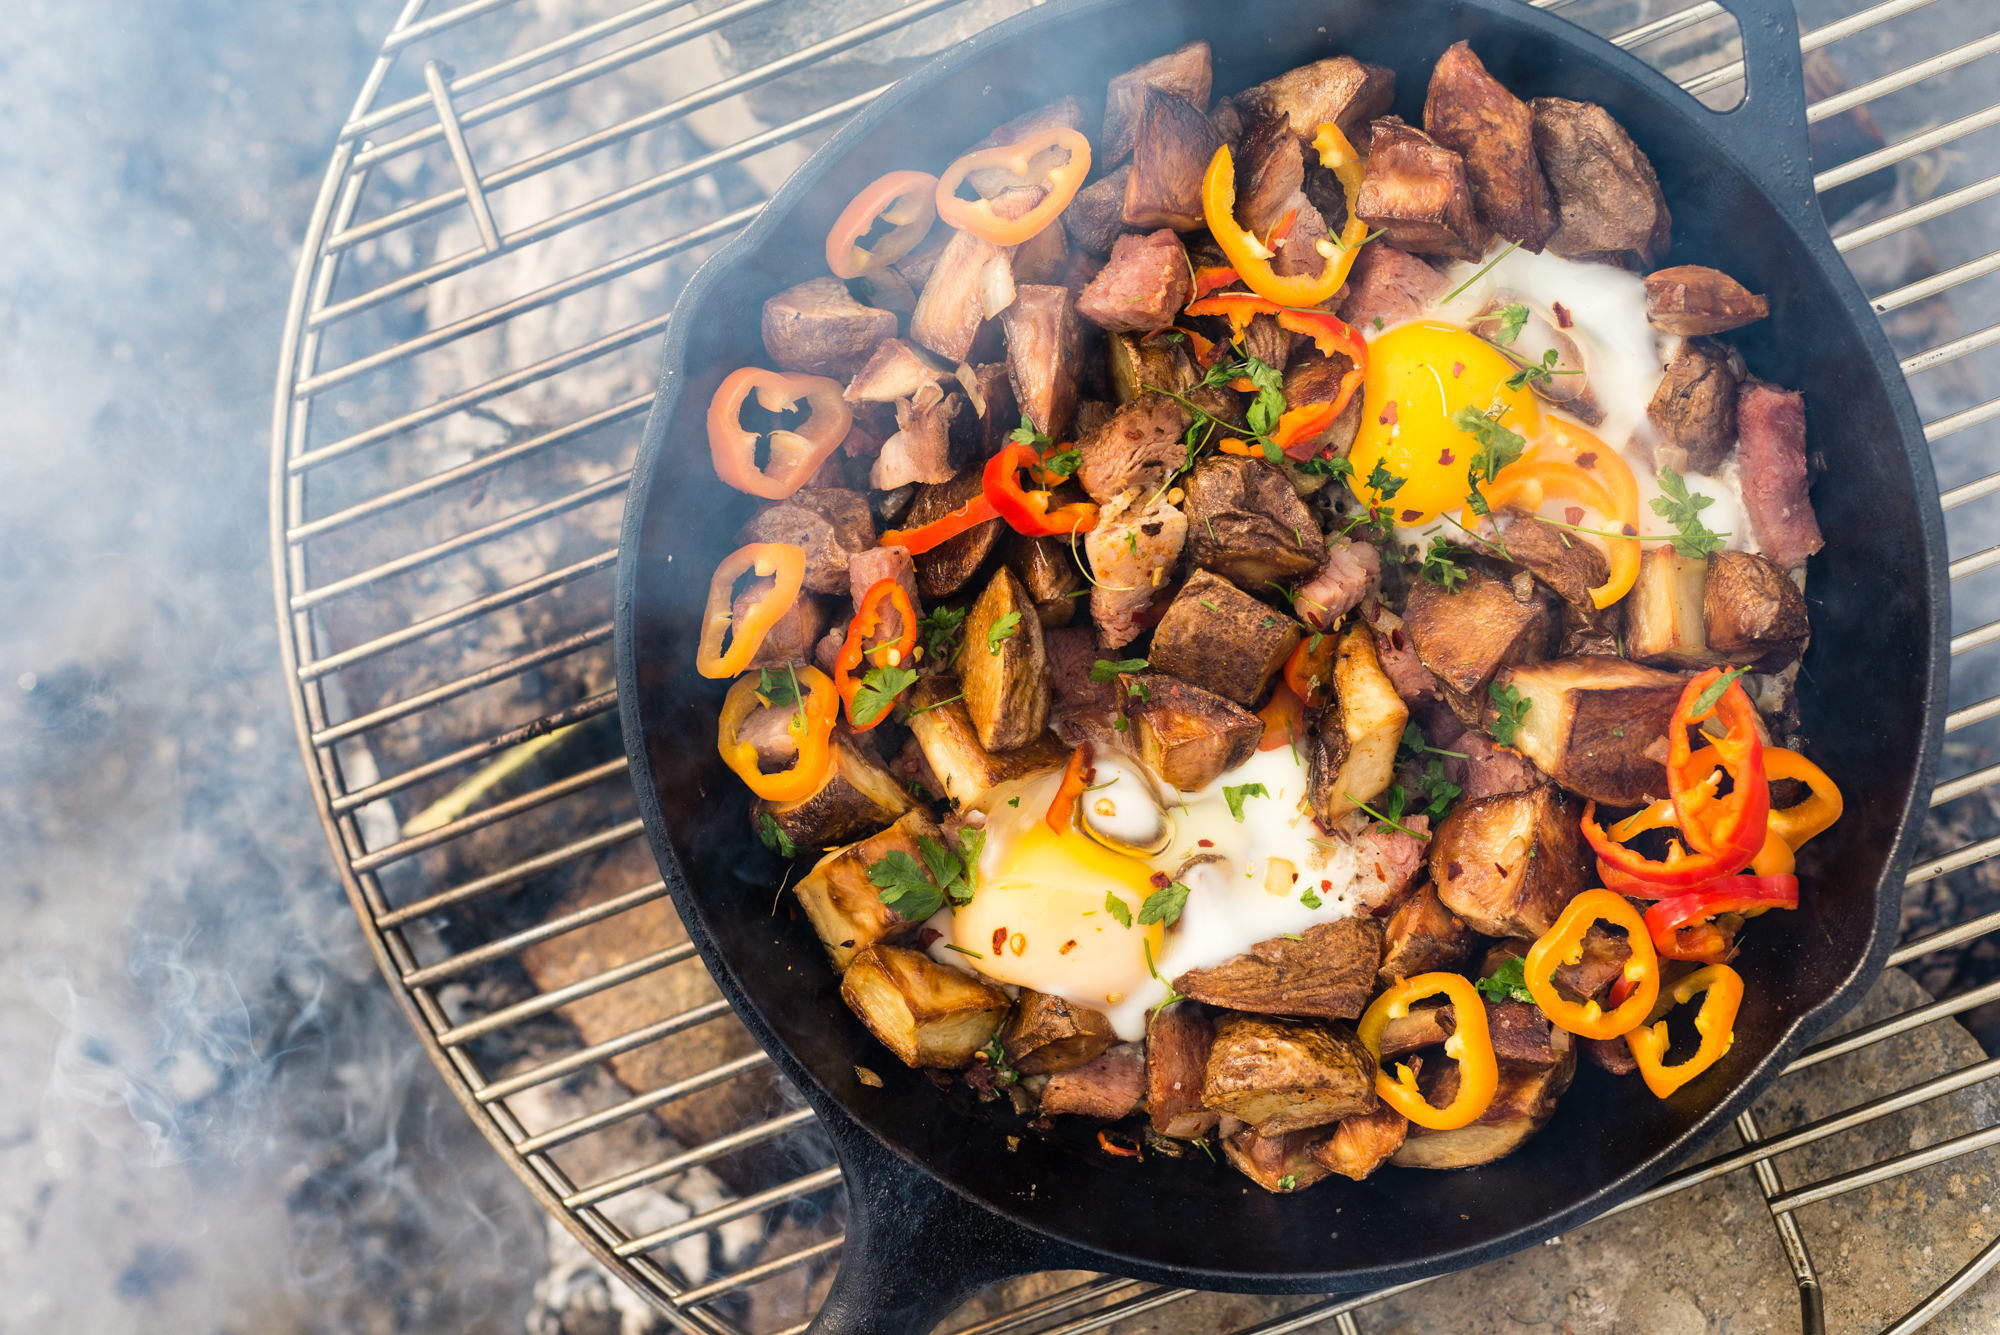 Season or Re-Season a Cast Iron Skillet - Over The Fire Cooking